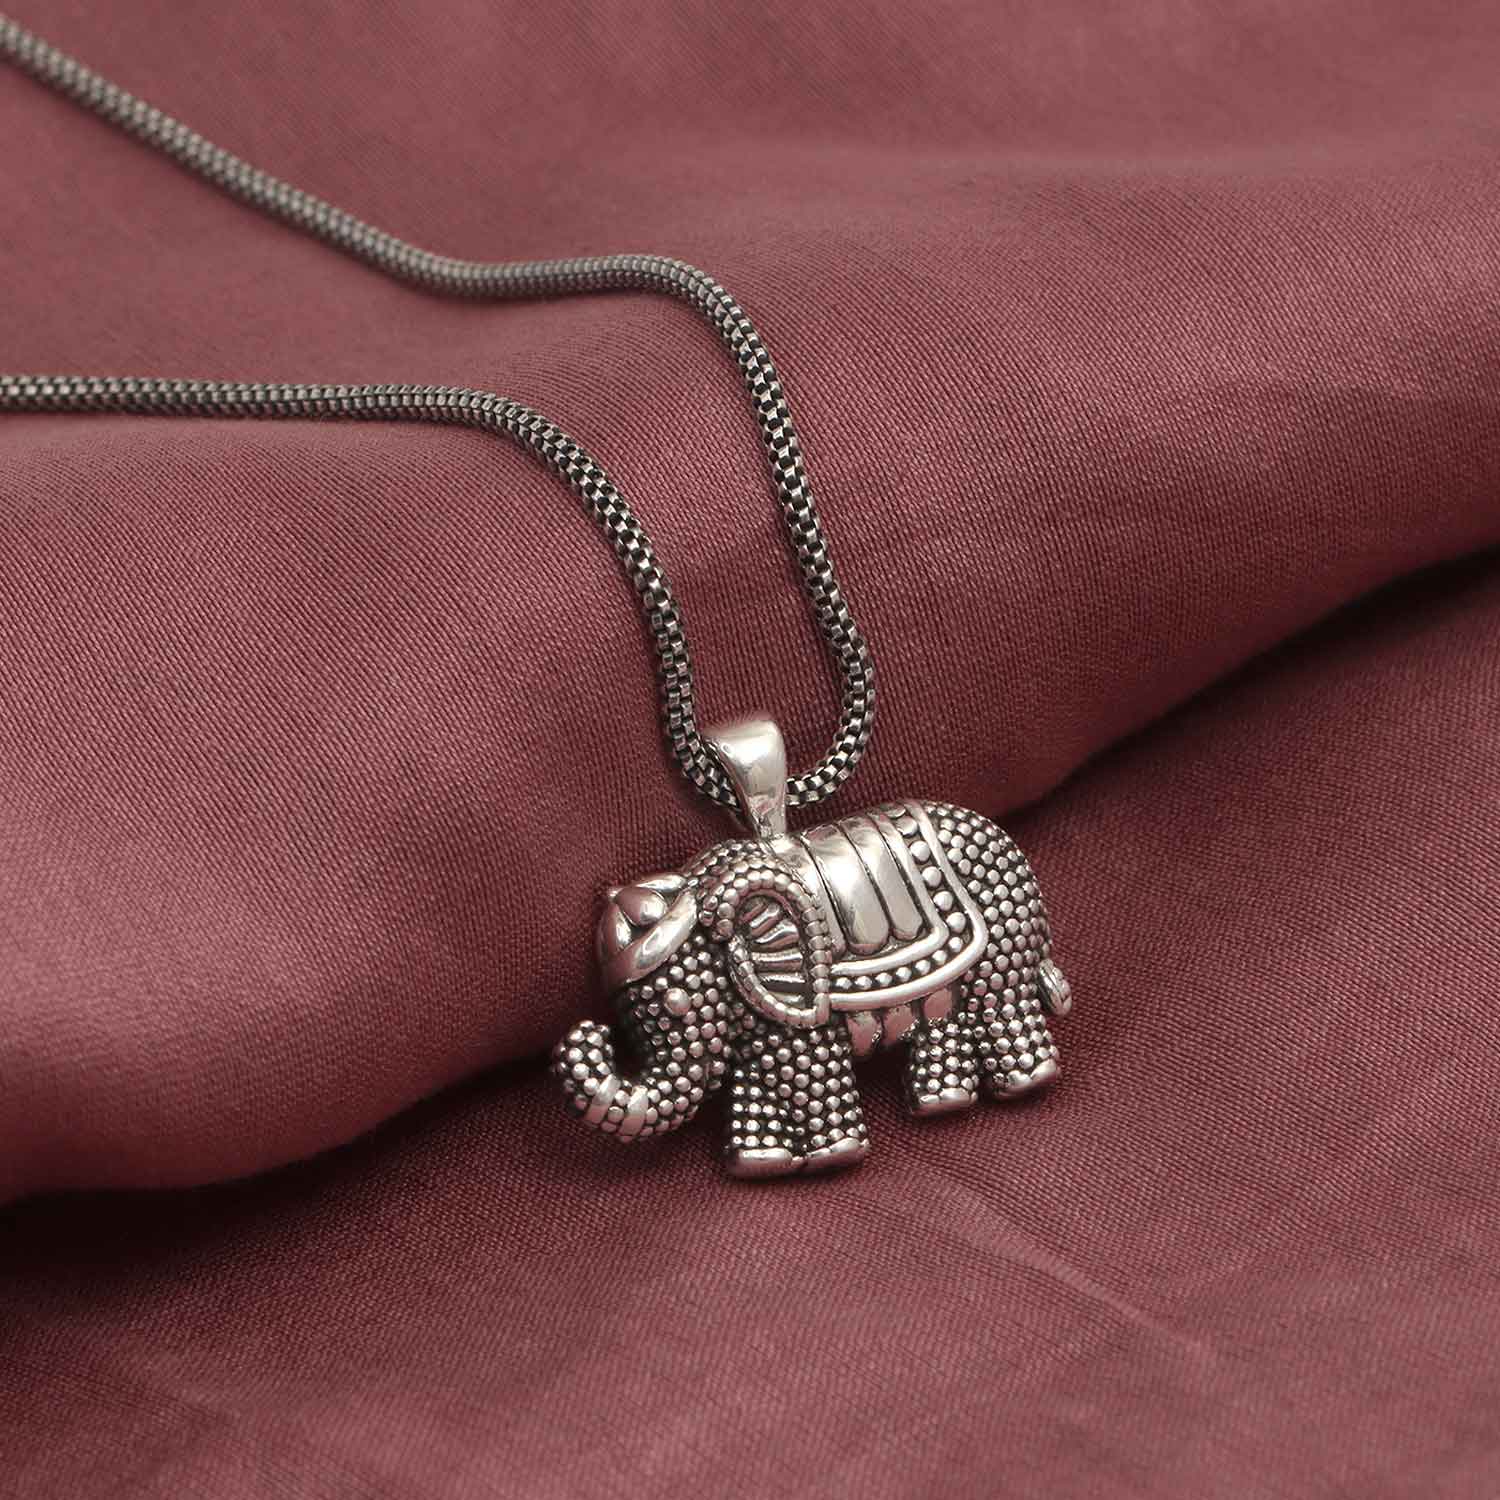 925 Sterling Silver Antique Bali-Style Elephant Pendant Cute Good Luck Animals Necklace for Women